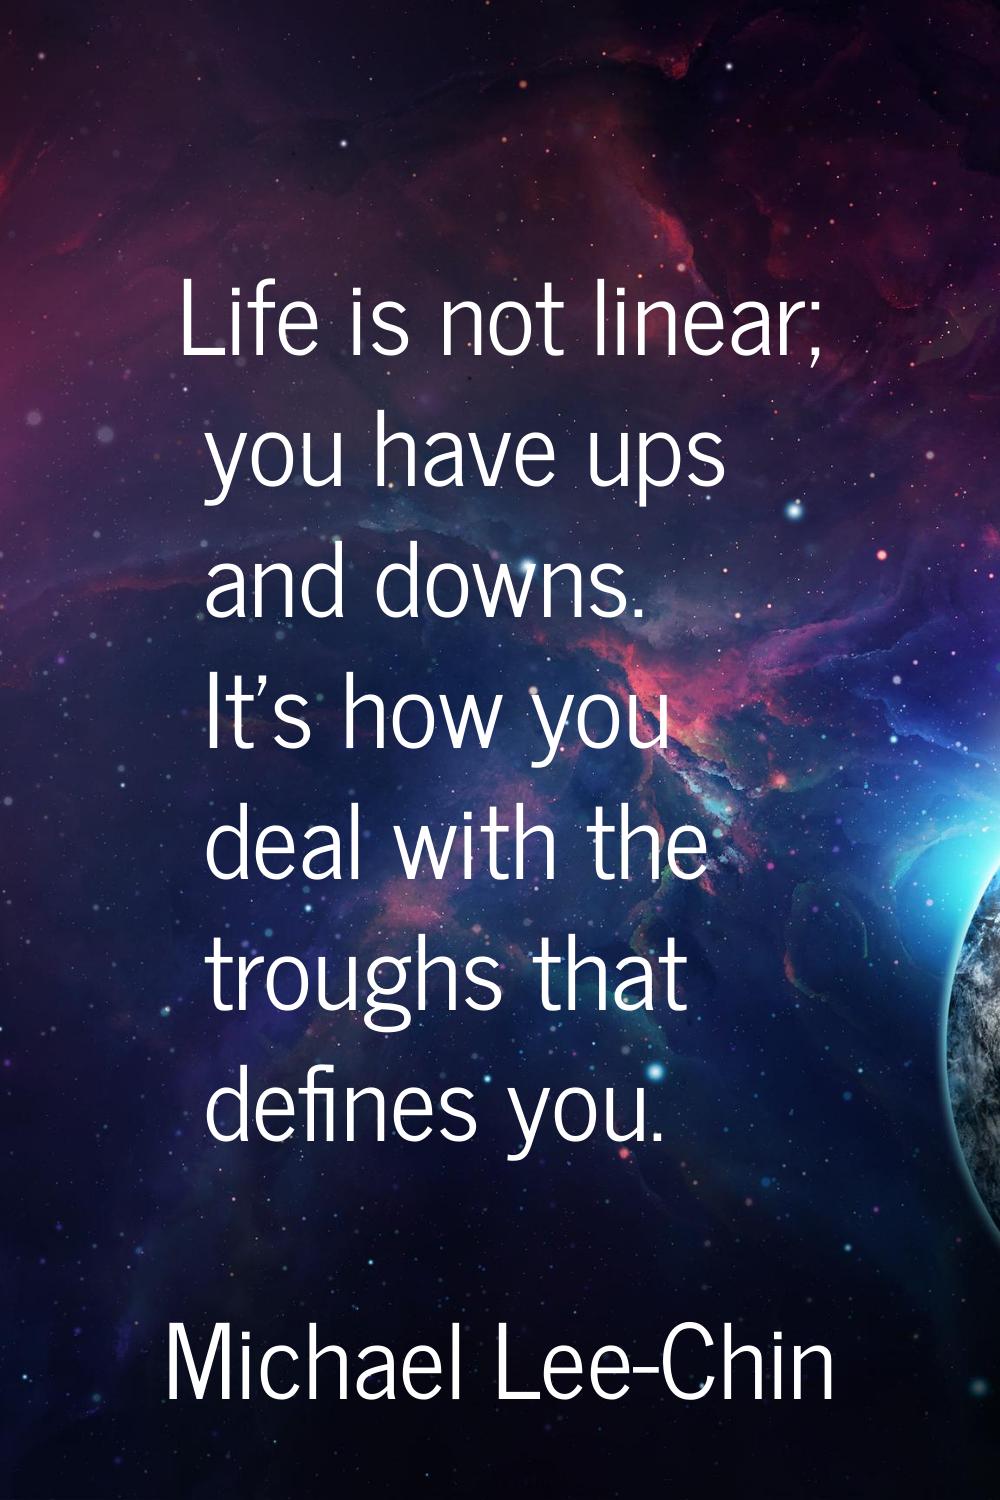 Life is not linear; you have ups and downs. It's how you deal with the troughs that defines you.